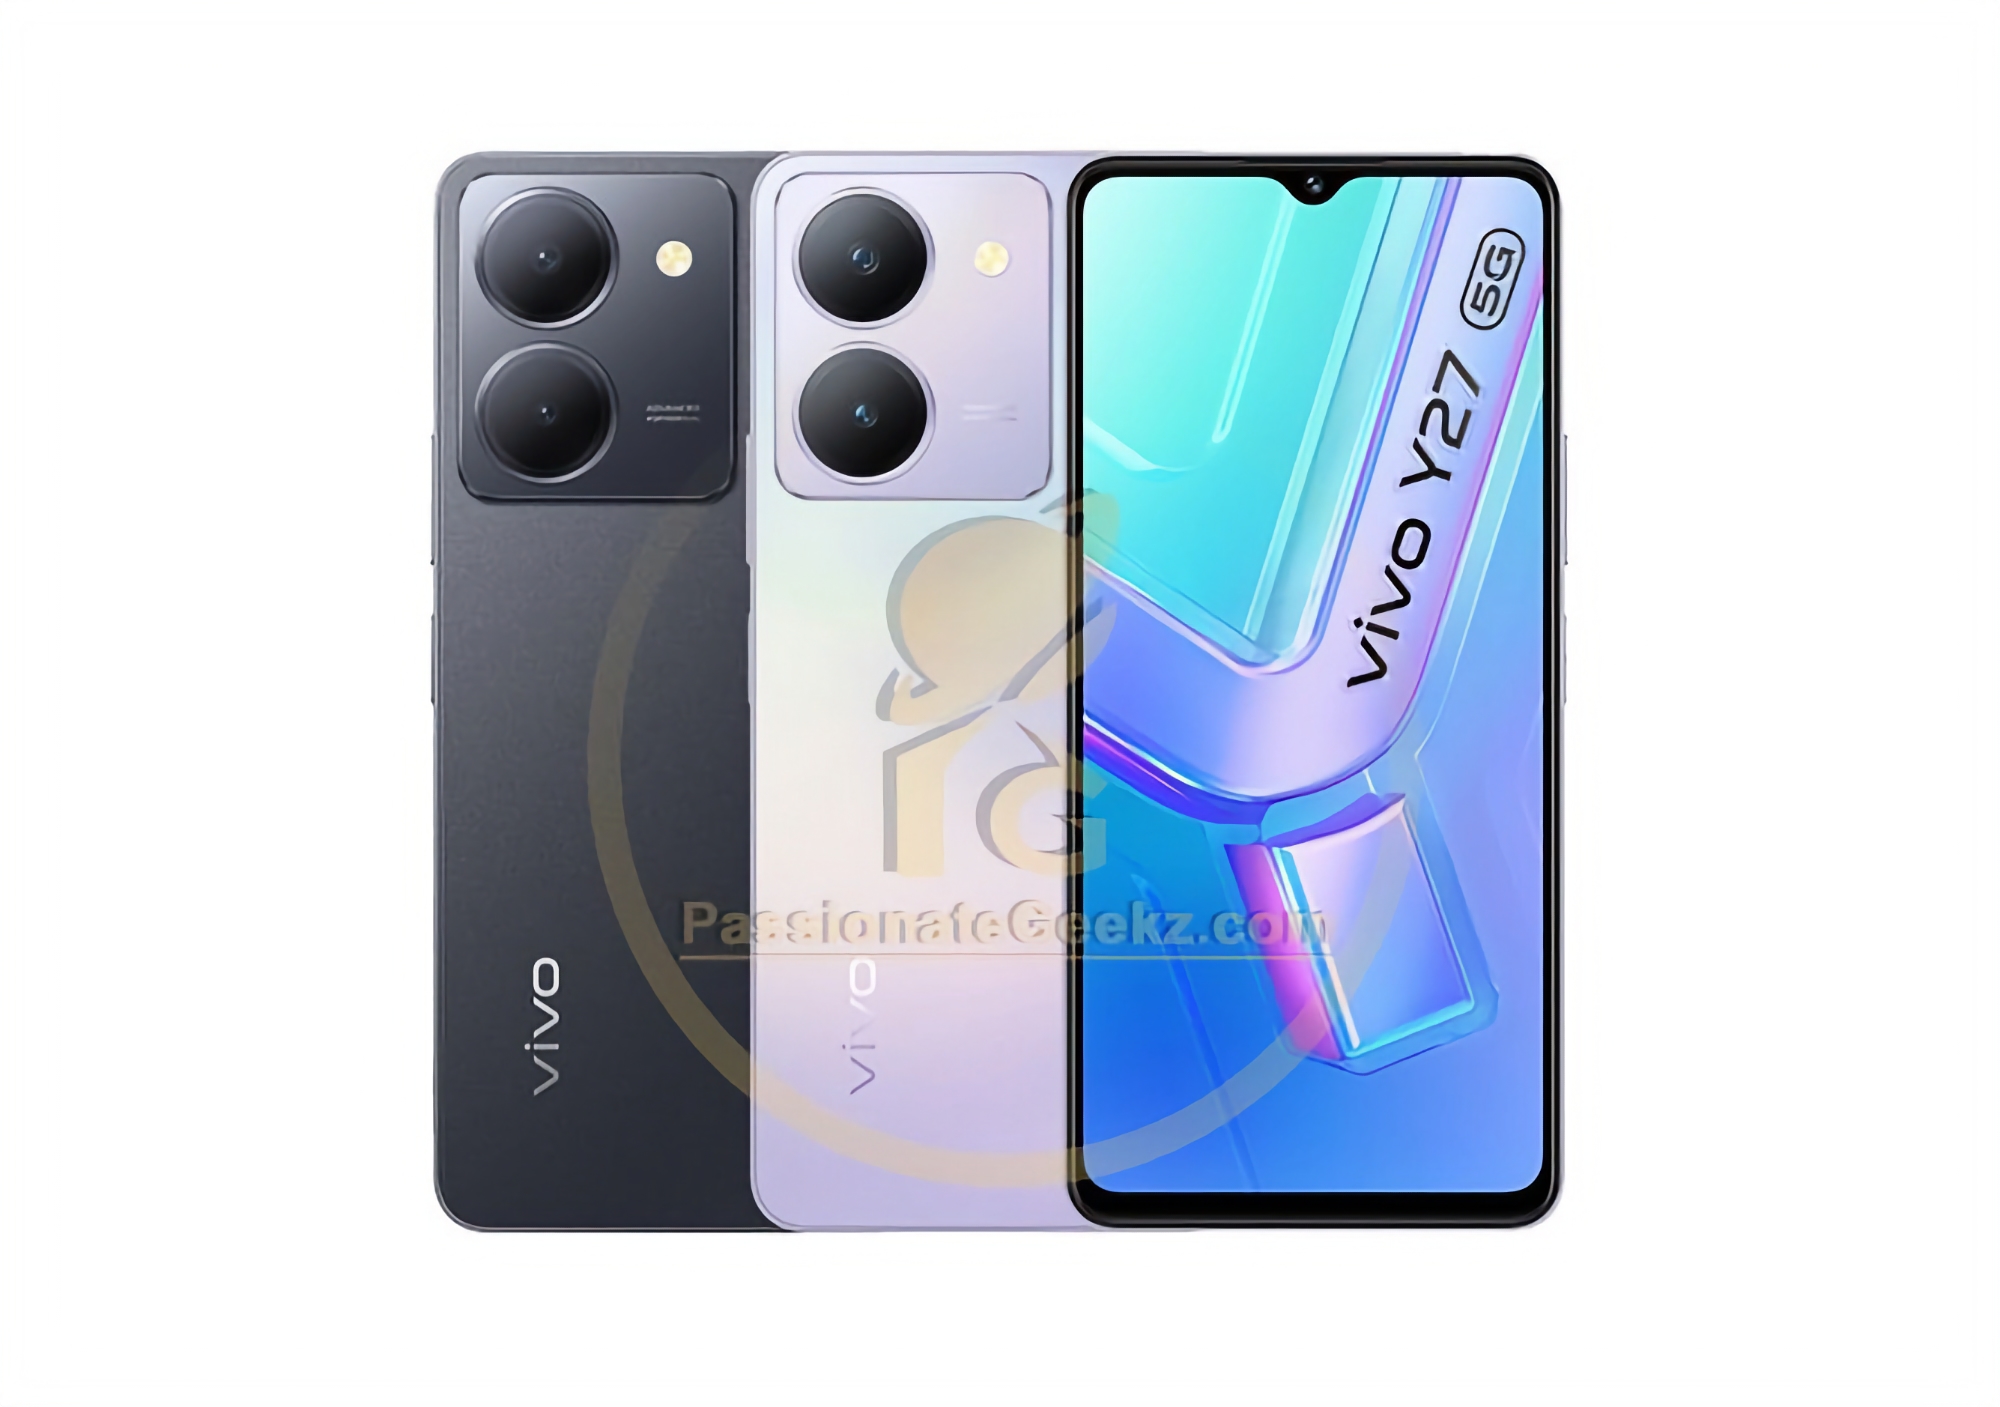 Here's what the vivo Y27 5G will look like: a smartphone with a MediaTek Dimensity 6020 chip and a 50 MP camera